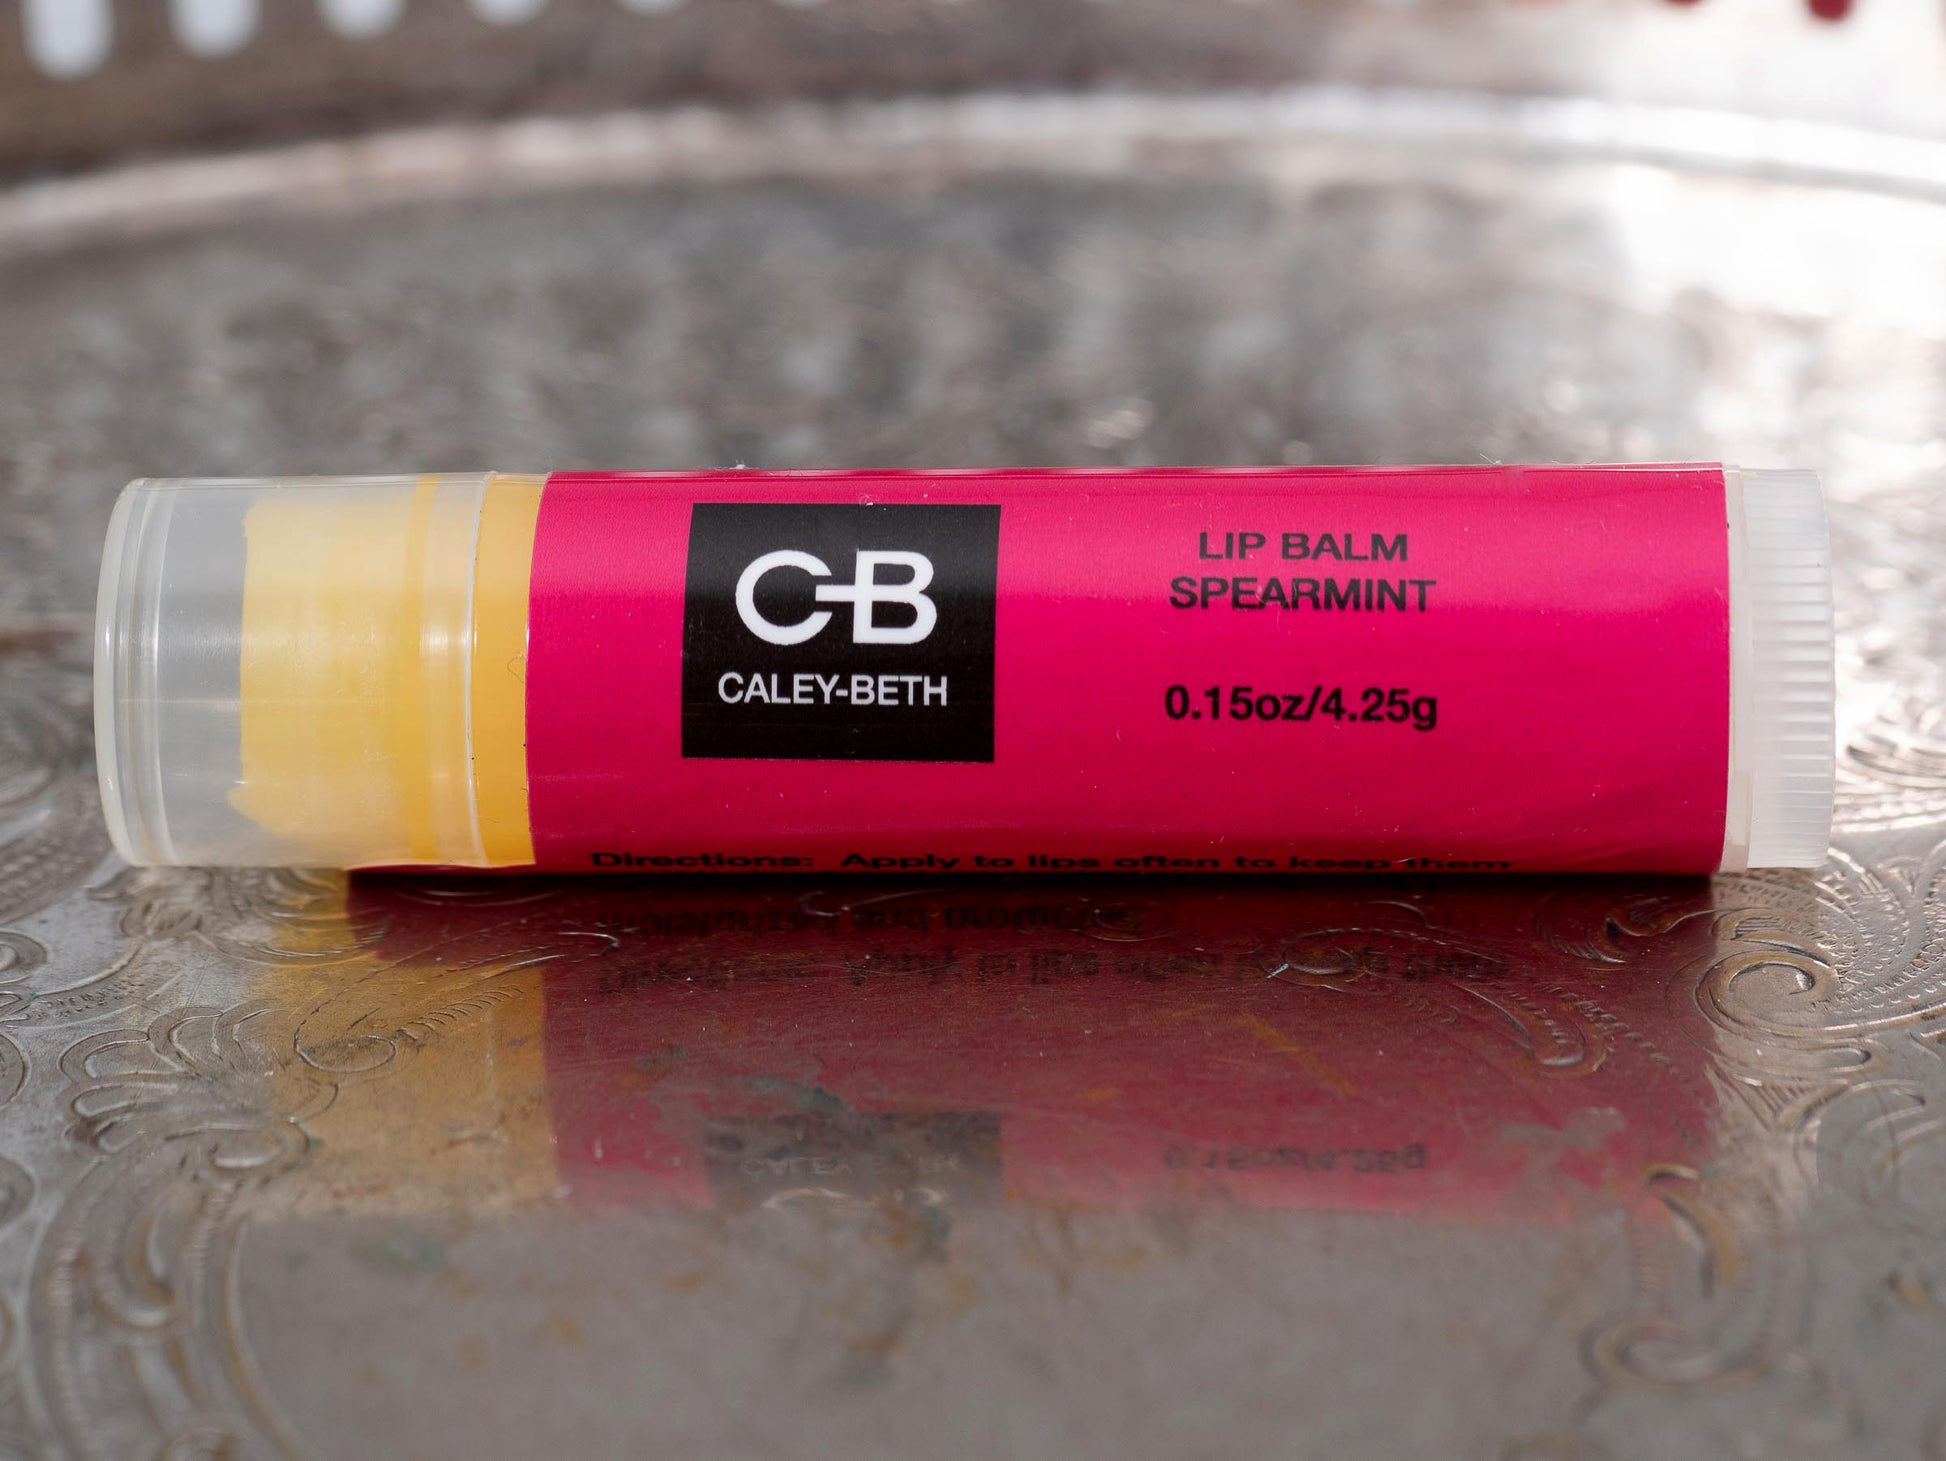 Caley-Beth sustainable skin and body care Toronto, Ontario Canada.   Best lip Balm that actually works for dry lips for men and women.